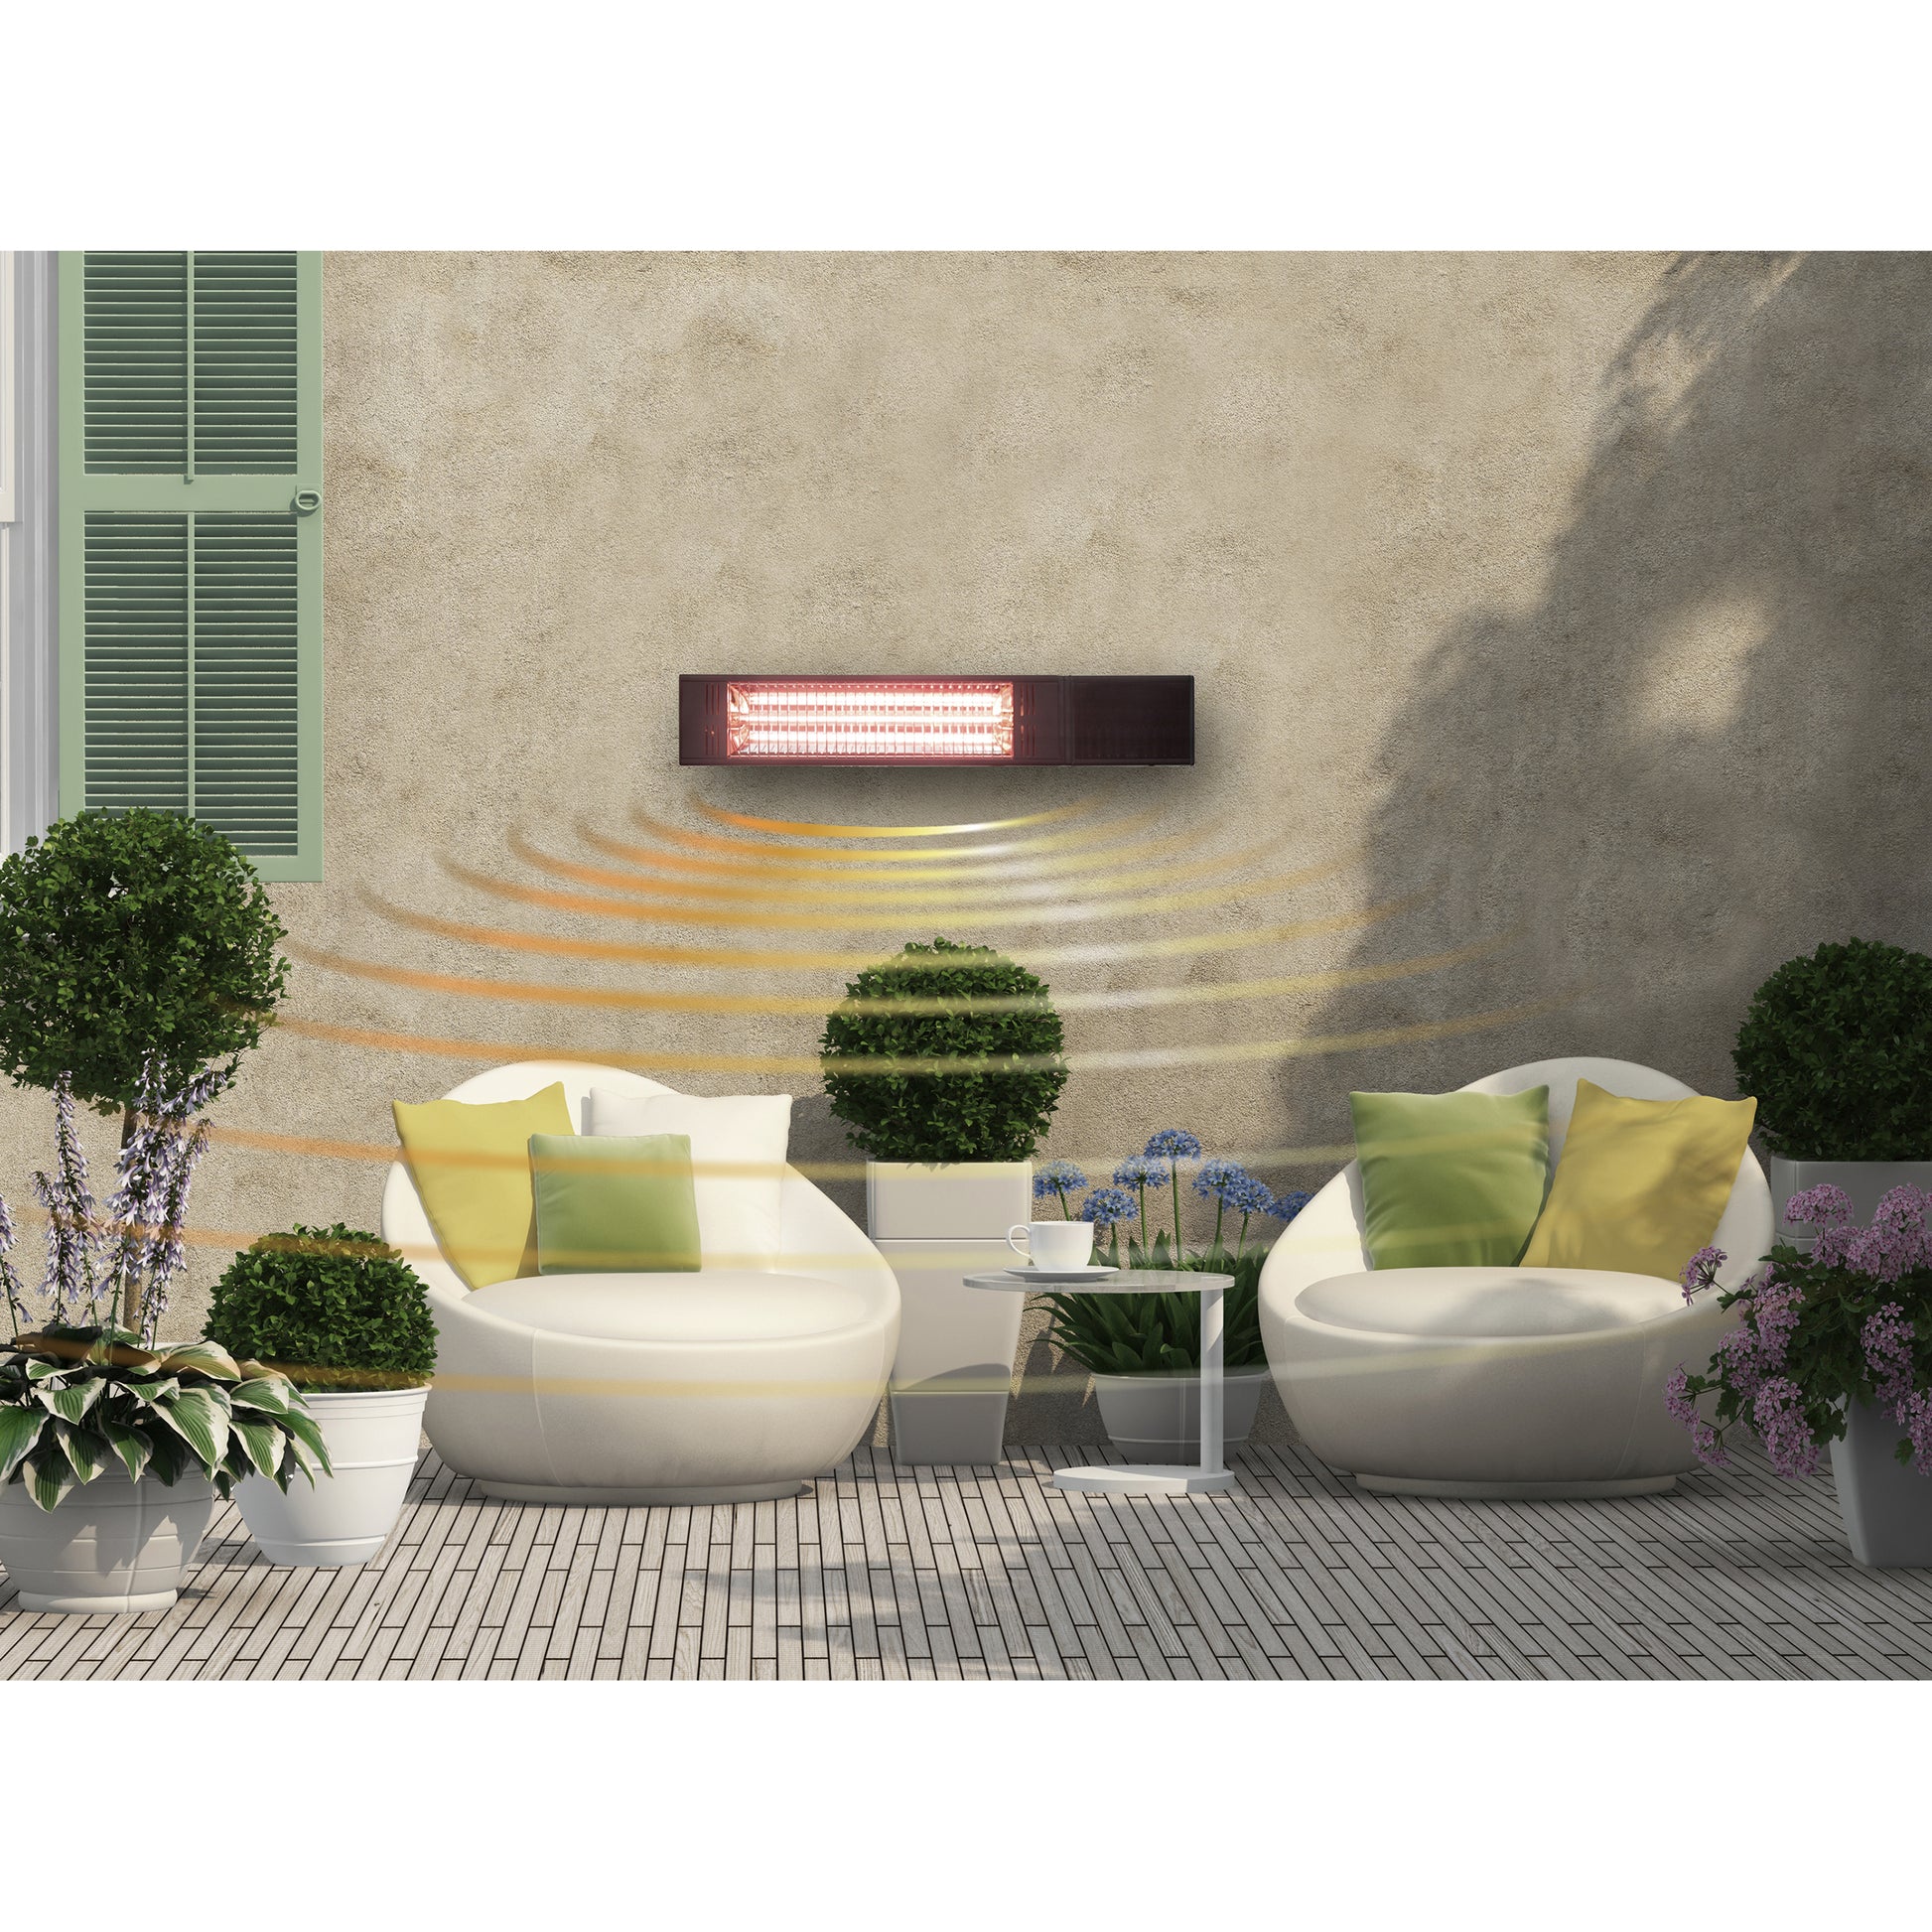 Westinghouse Infrared Electric Outdoor Heater - Wall Mounted with Gold Tube and Remote Control alt 0